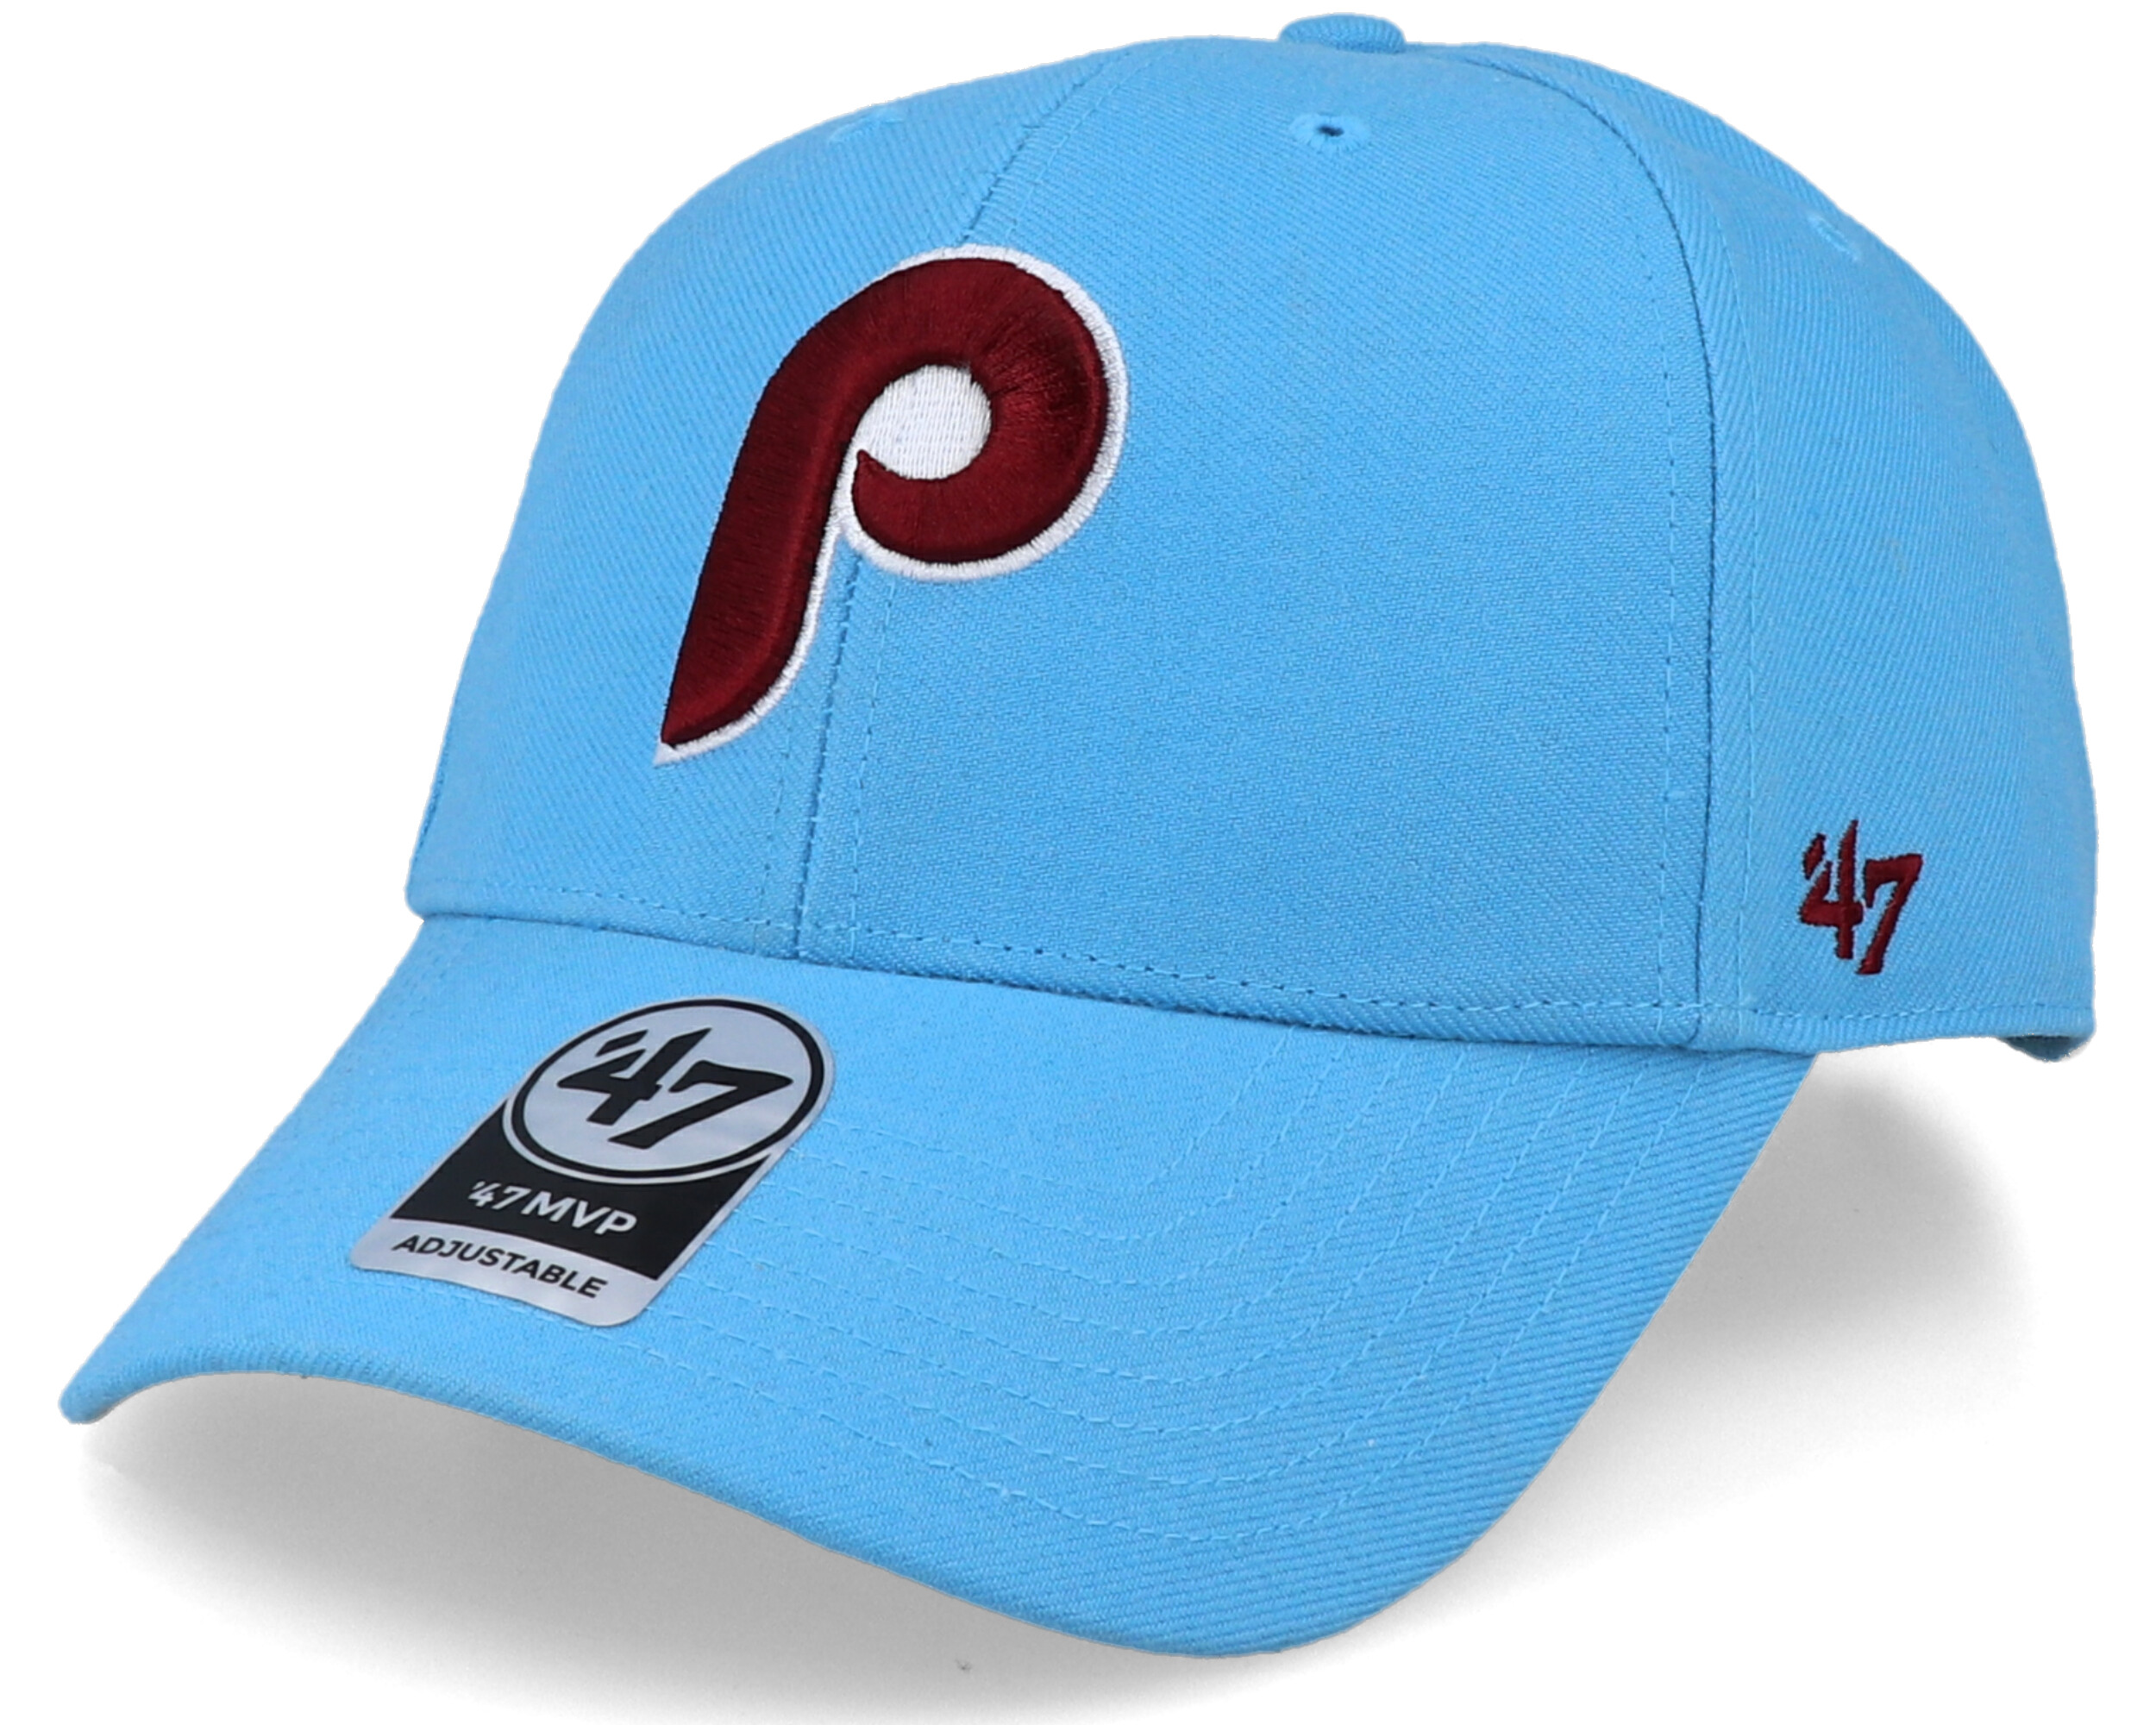 PHILADELPHIA PHILLIES COOPERSTOWN CLASSIC '47 FRANCHISE